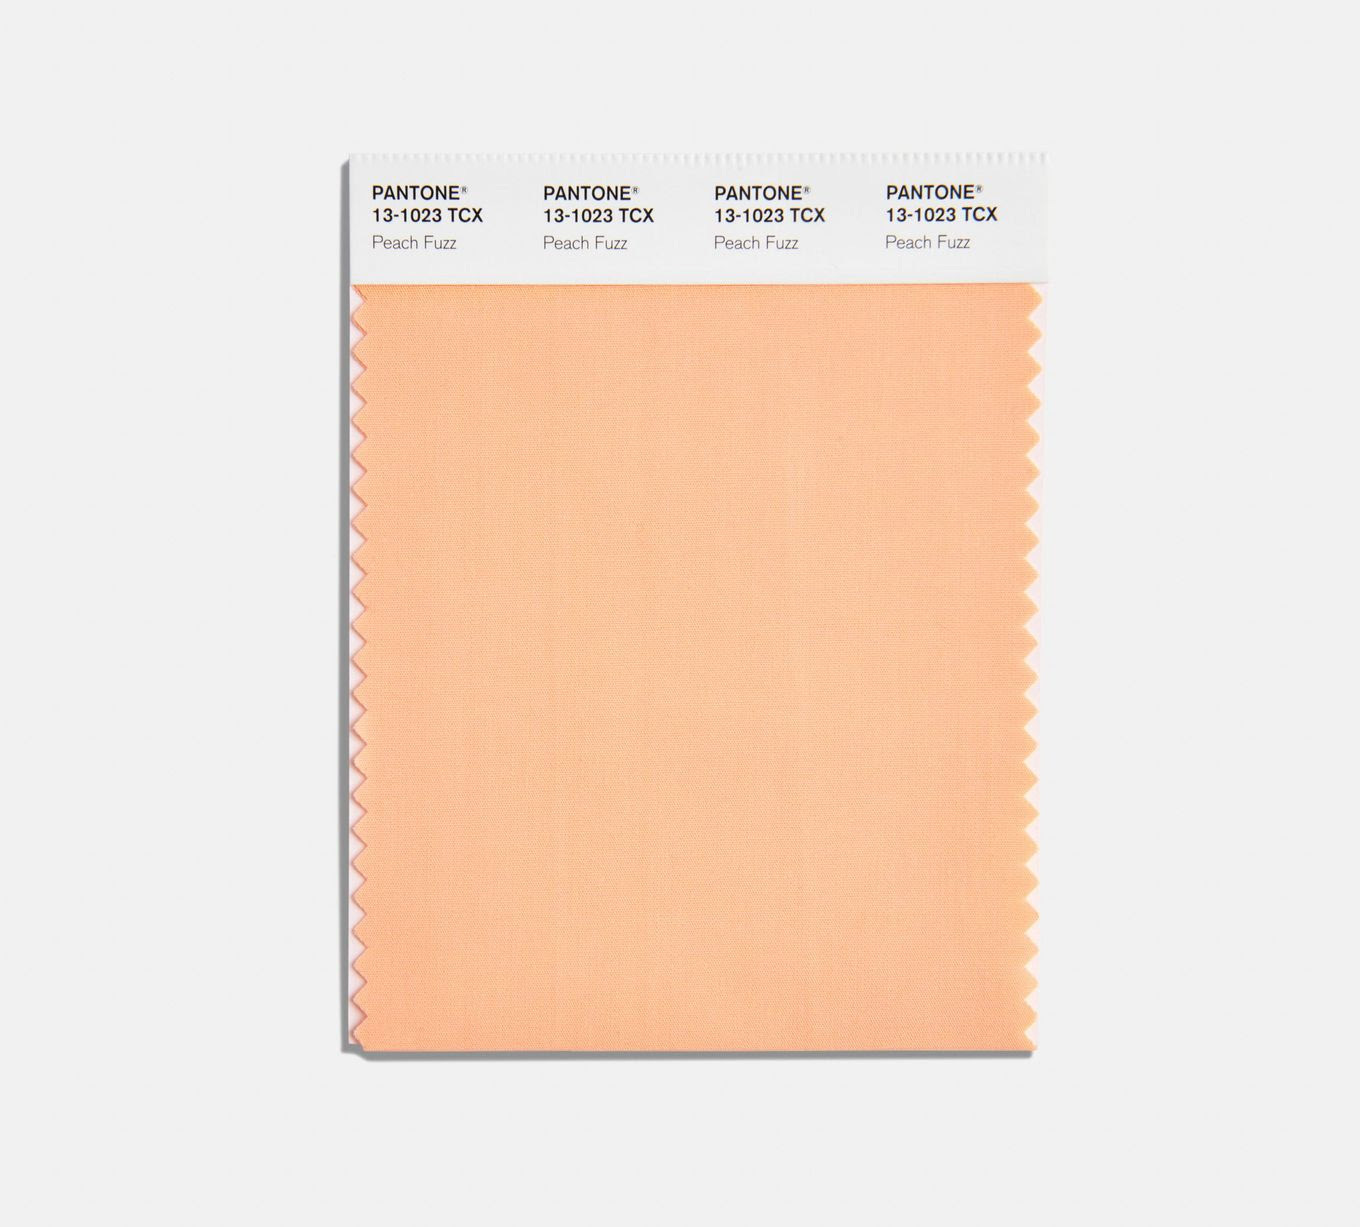 Pantone describes the color as “sensitive but sweet and airy.” (Pantone)